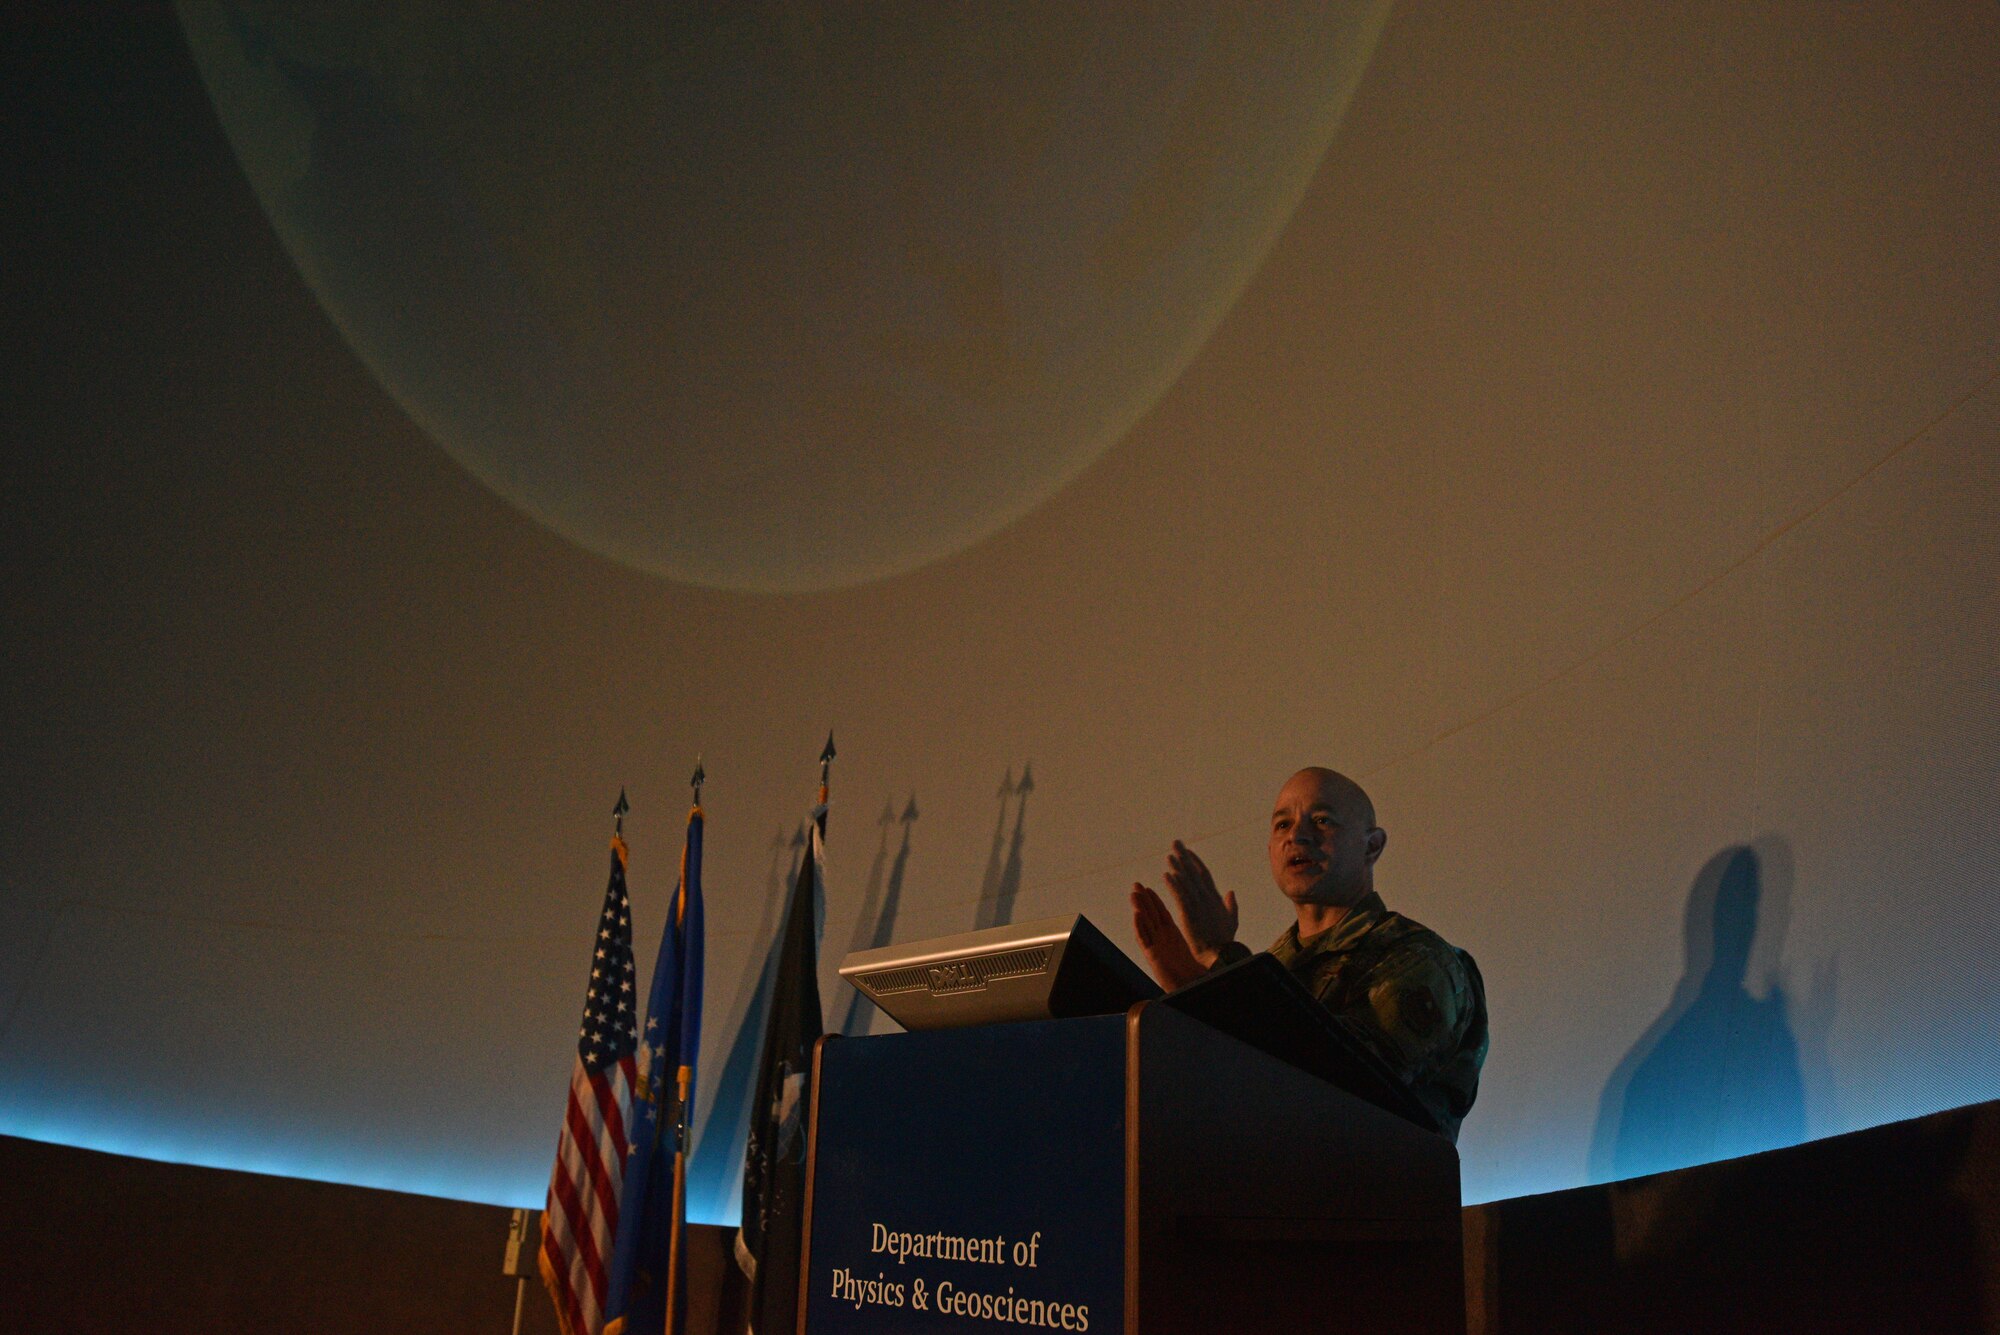 U.S. Air Force Col. Andres Nazario, 17th Training Wing commander, addresses the audience at Angelo State University’s Planetarium in San Angelo, Texas, March 26, 2021. Angelo State University hosted a ceremony for Goodfellow members transferring their service from the United States Air Force to the United States Space Force at their planetarium in San Angelo, Texas, March 26.  (U.S. Air Force photo by Senior Airman Ashley Thrash)